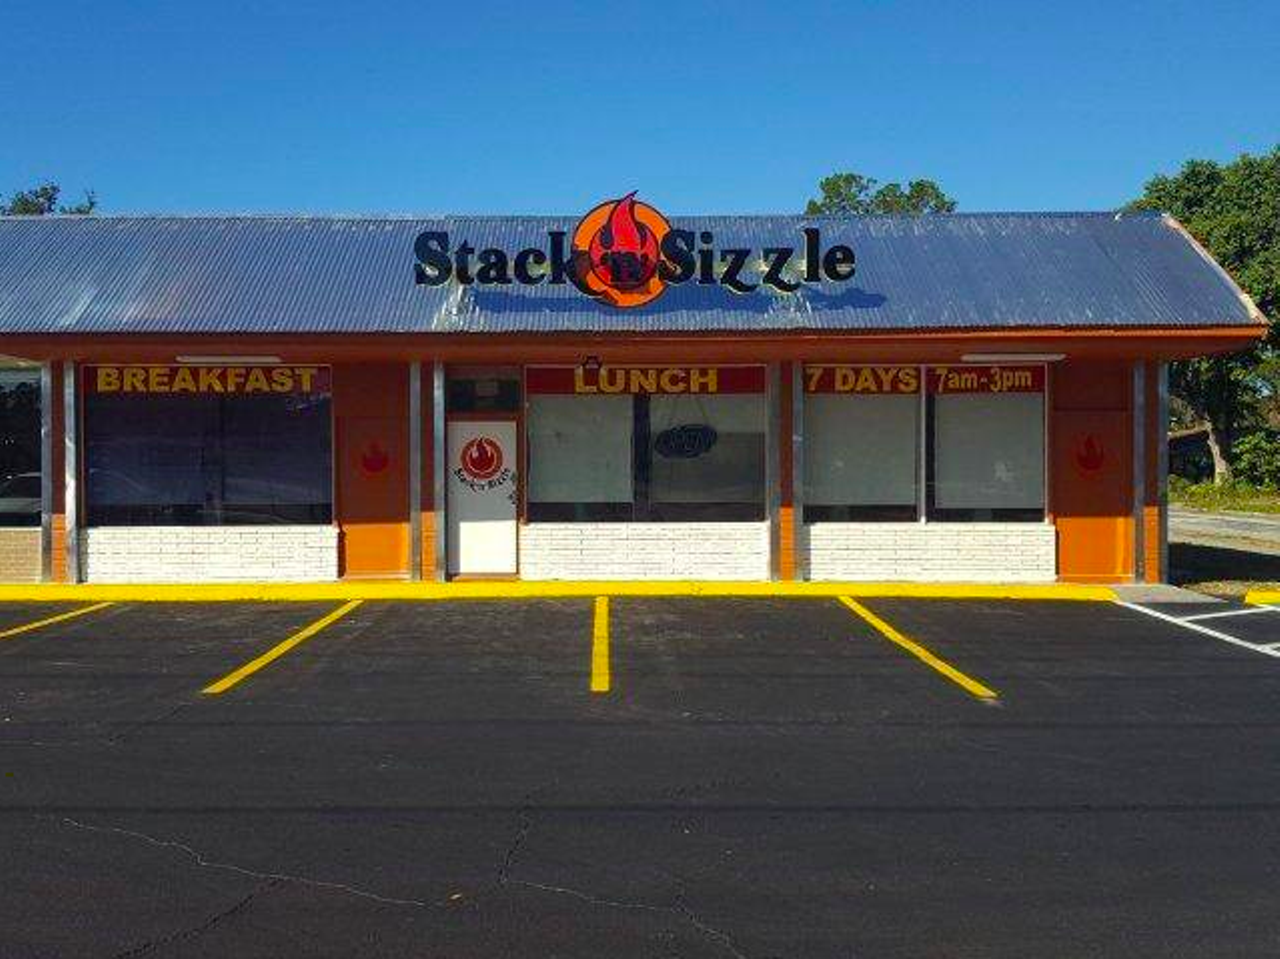 Stack 'n' Sizzle  
401 49th St. S., St. Petersburg
A Southern-inspired comfort foods joint, Stack &#145;n&#146; Sizzle served up both hefty stacks of pancakes and French toast as well as fried catfish and country fried steak in St. Pete until its recent announcement, &#147;Stack 'n' Sizzle is now permanently closed,&#148; on Facebook.
Photo via Stack 'n' Sizzle/Facebook